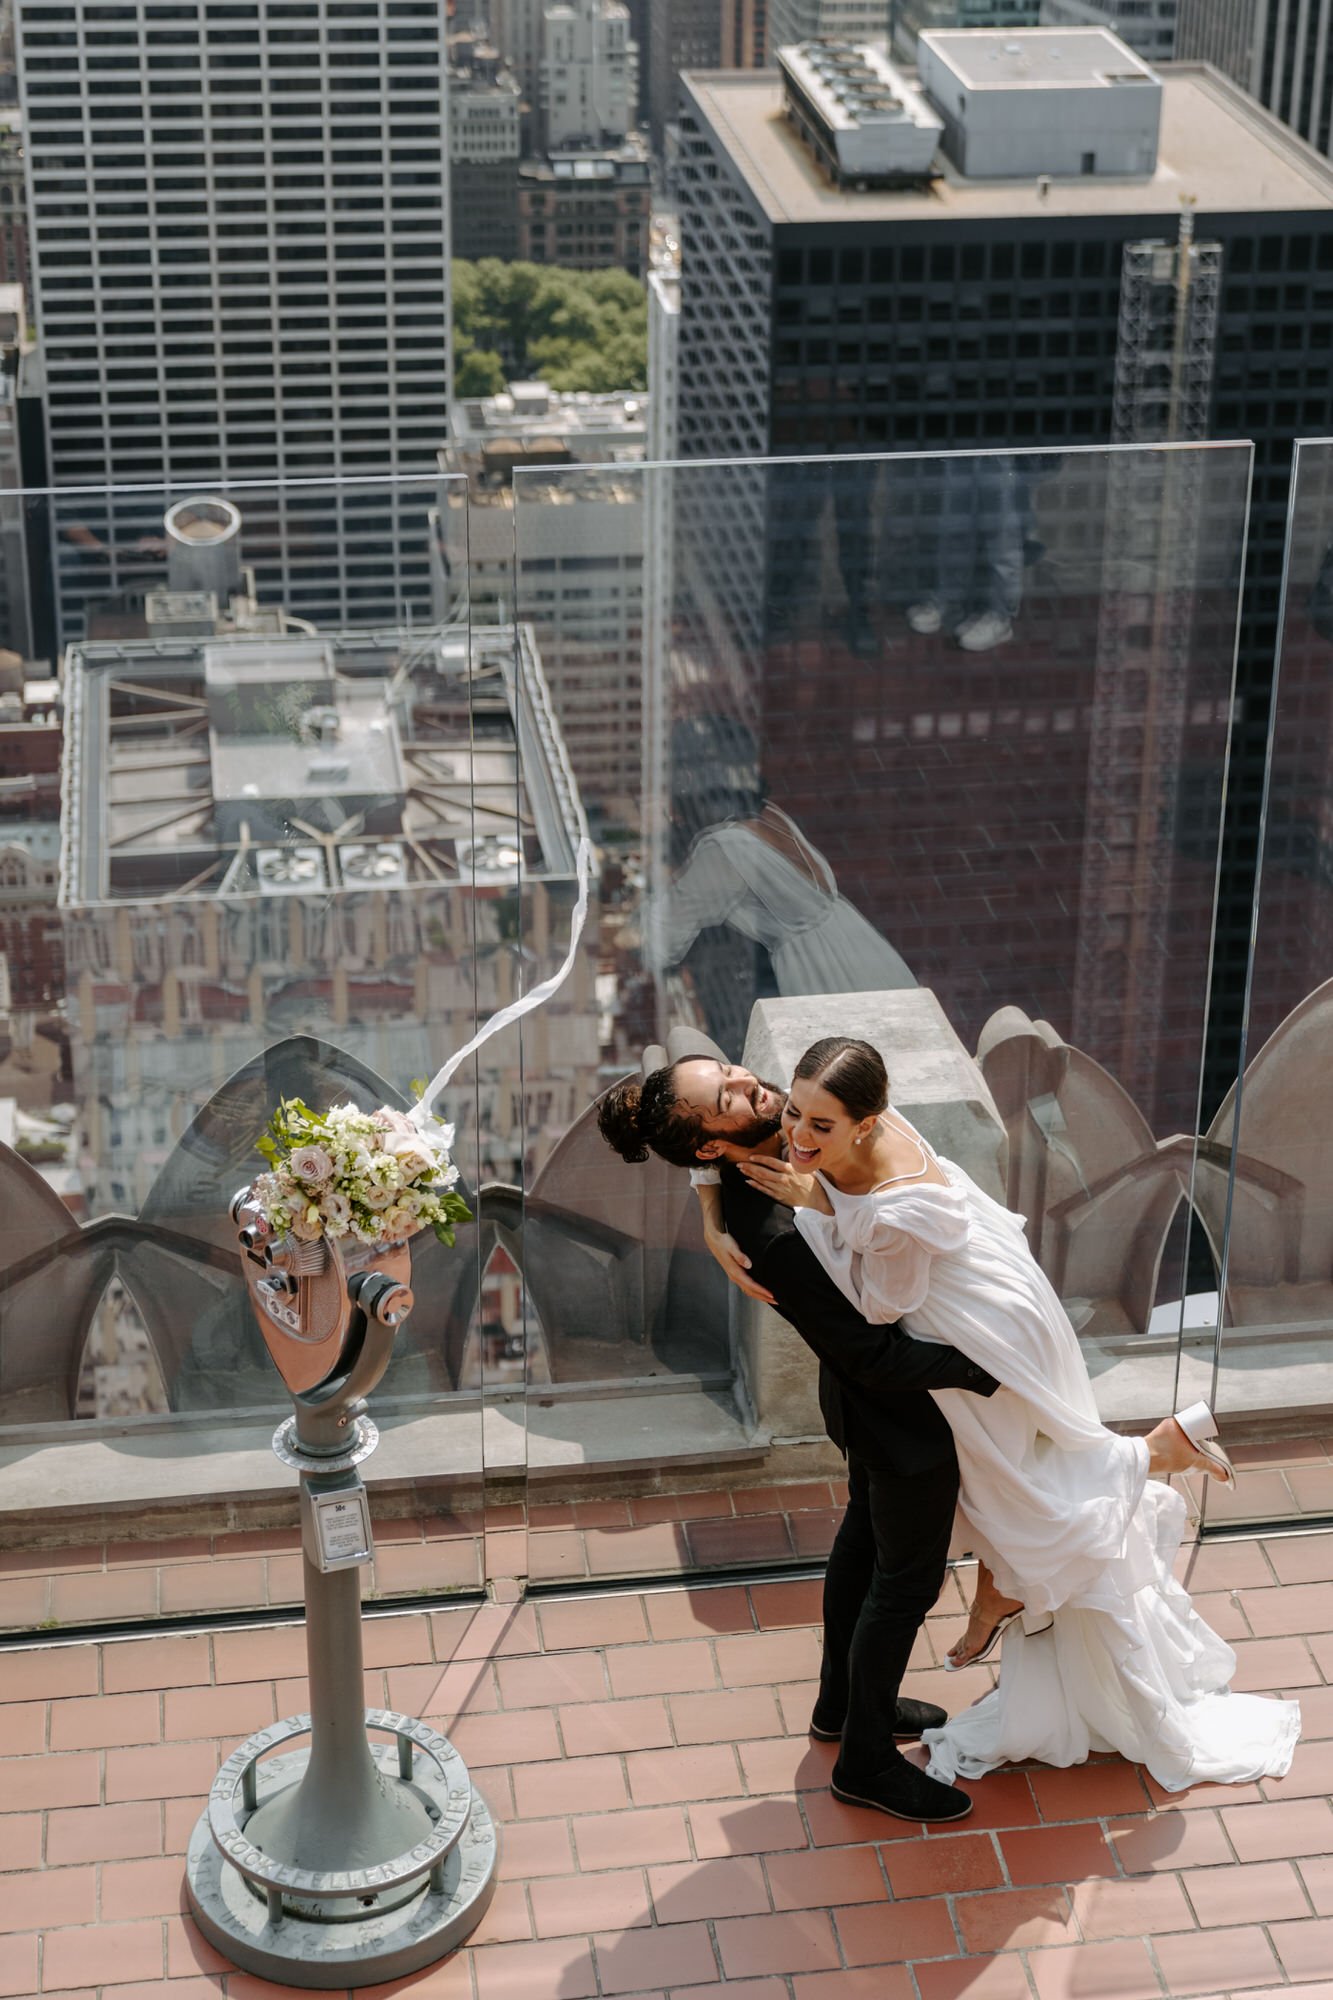 NYC-Top-of-The-Rock-Elopement-NYC-Photographer-Steph-Powell-Creative-32.jpg